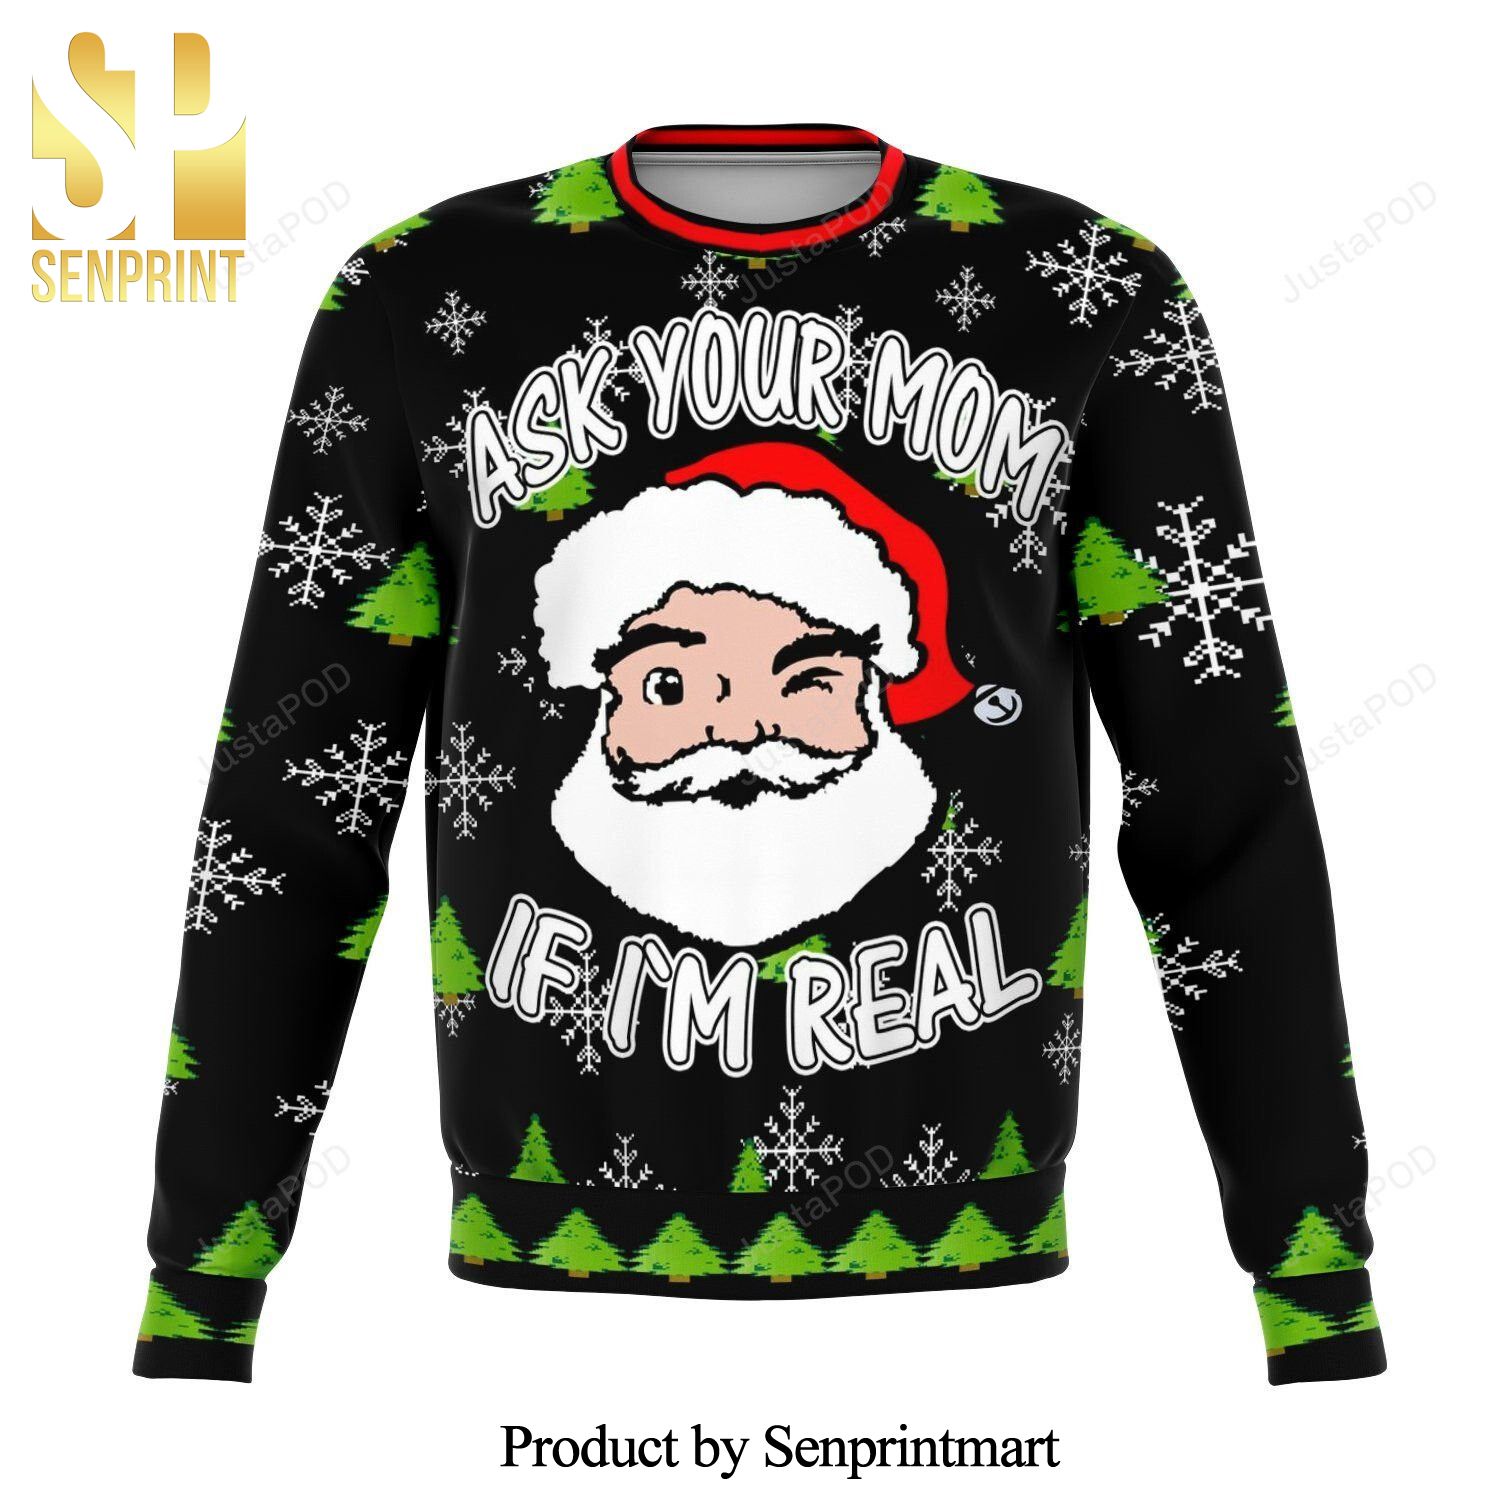 Ask Your Mom If Im Real Dank Knitted Ugly Christmas Sweater